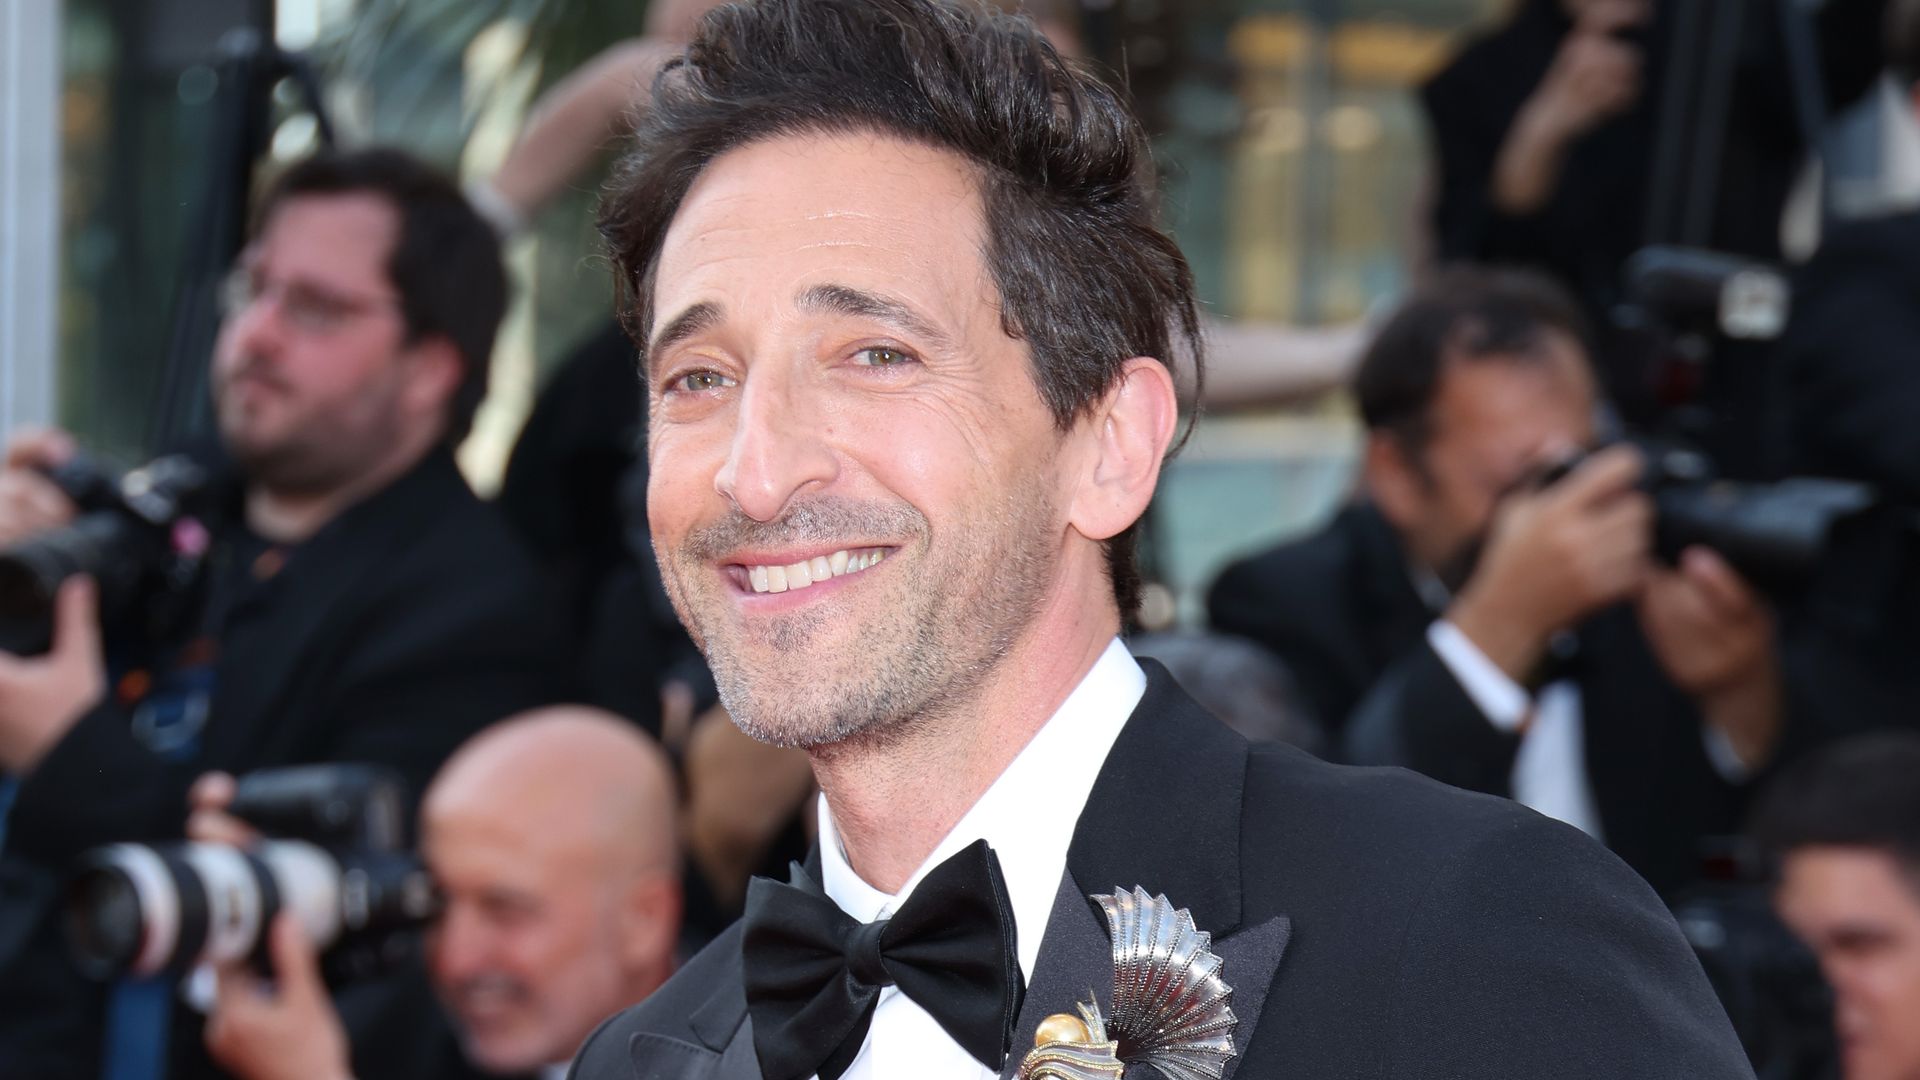 Adrien Brody smiling at a red carpet event